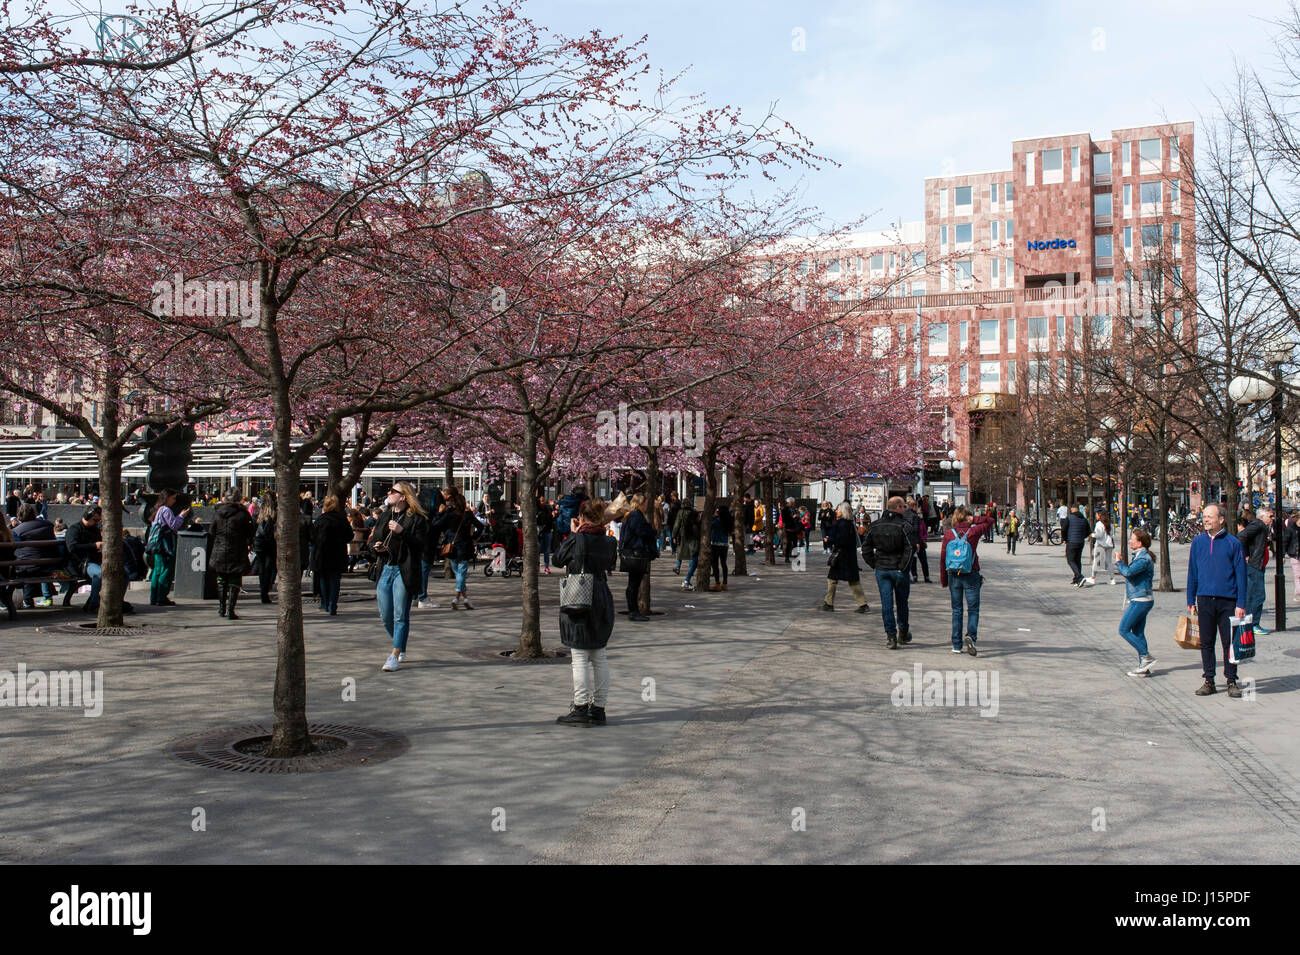 Cherry blossoms at the Kungstradgarden park. Stock Photo